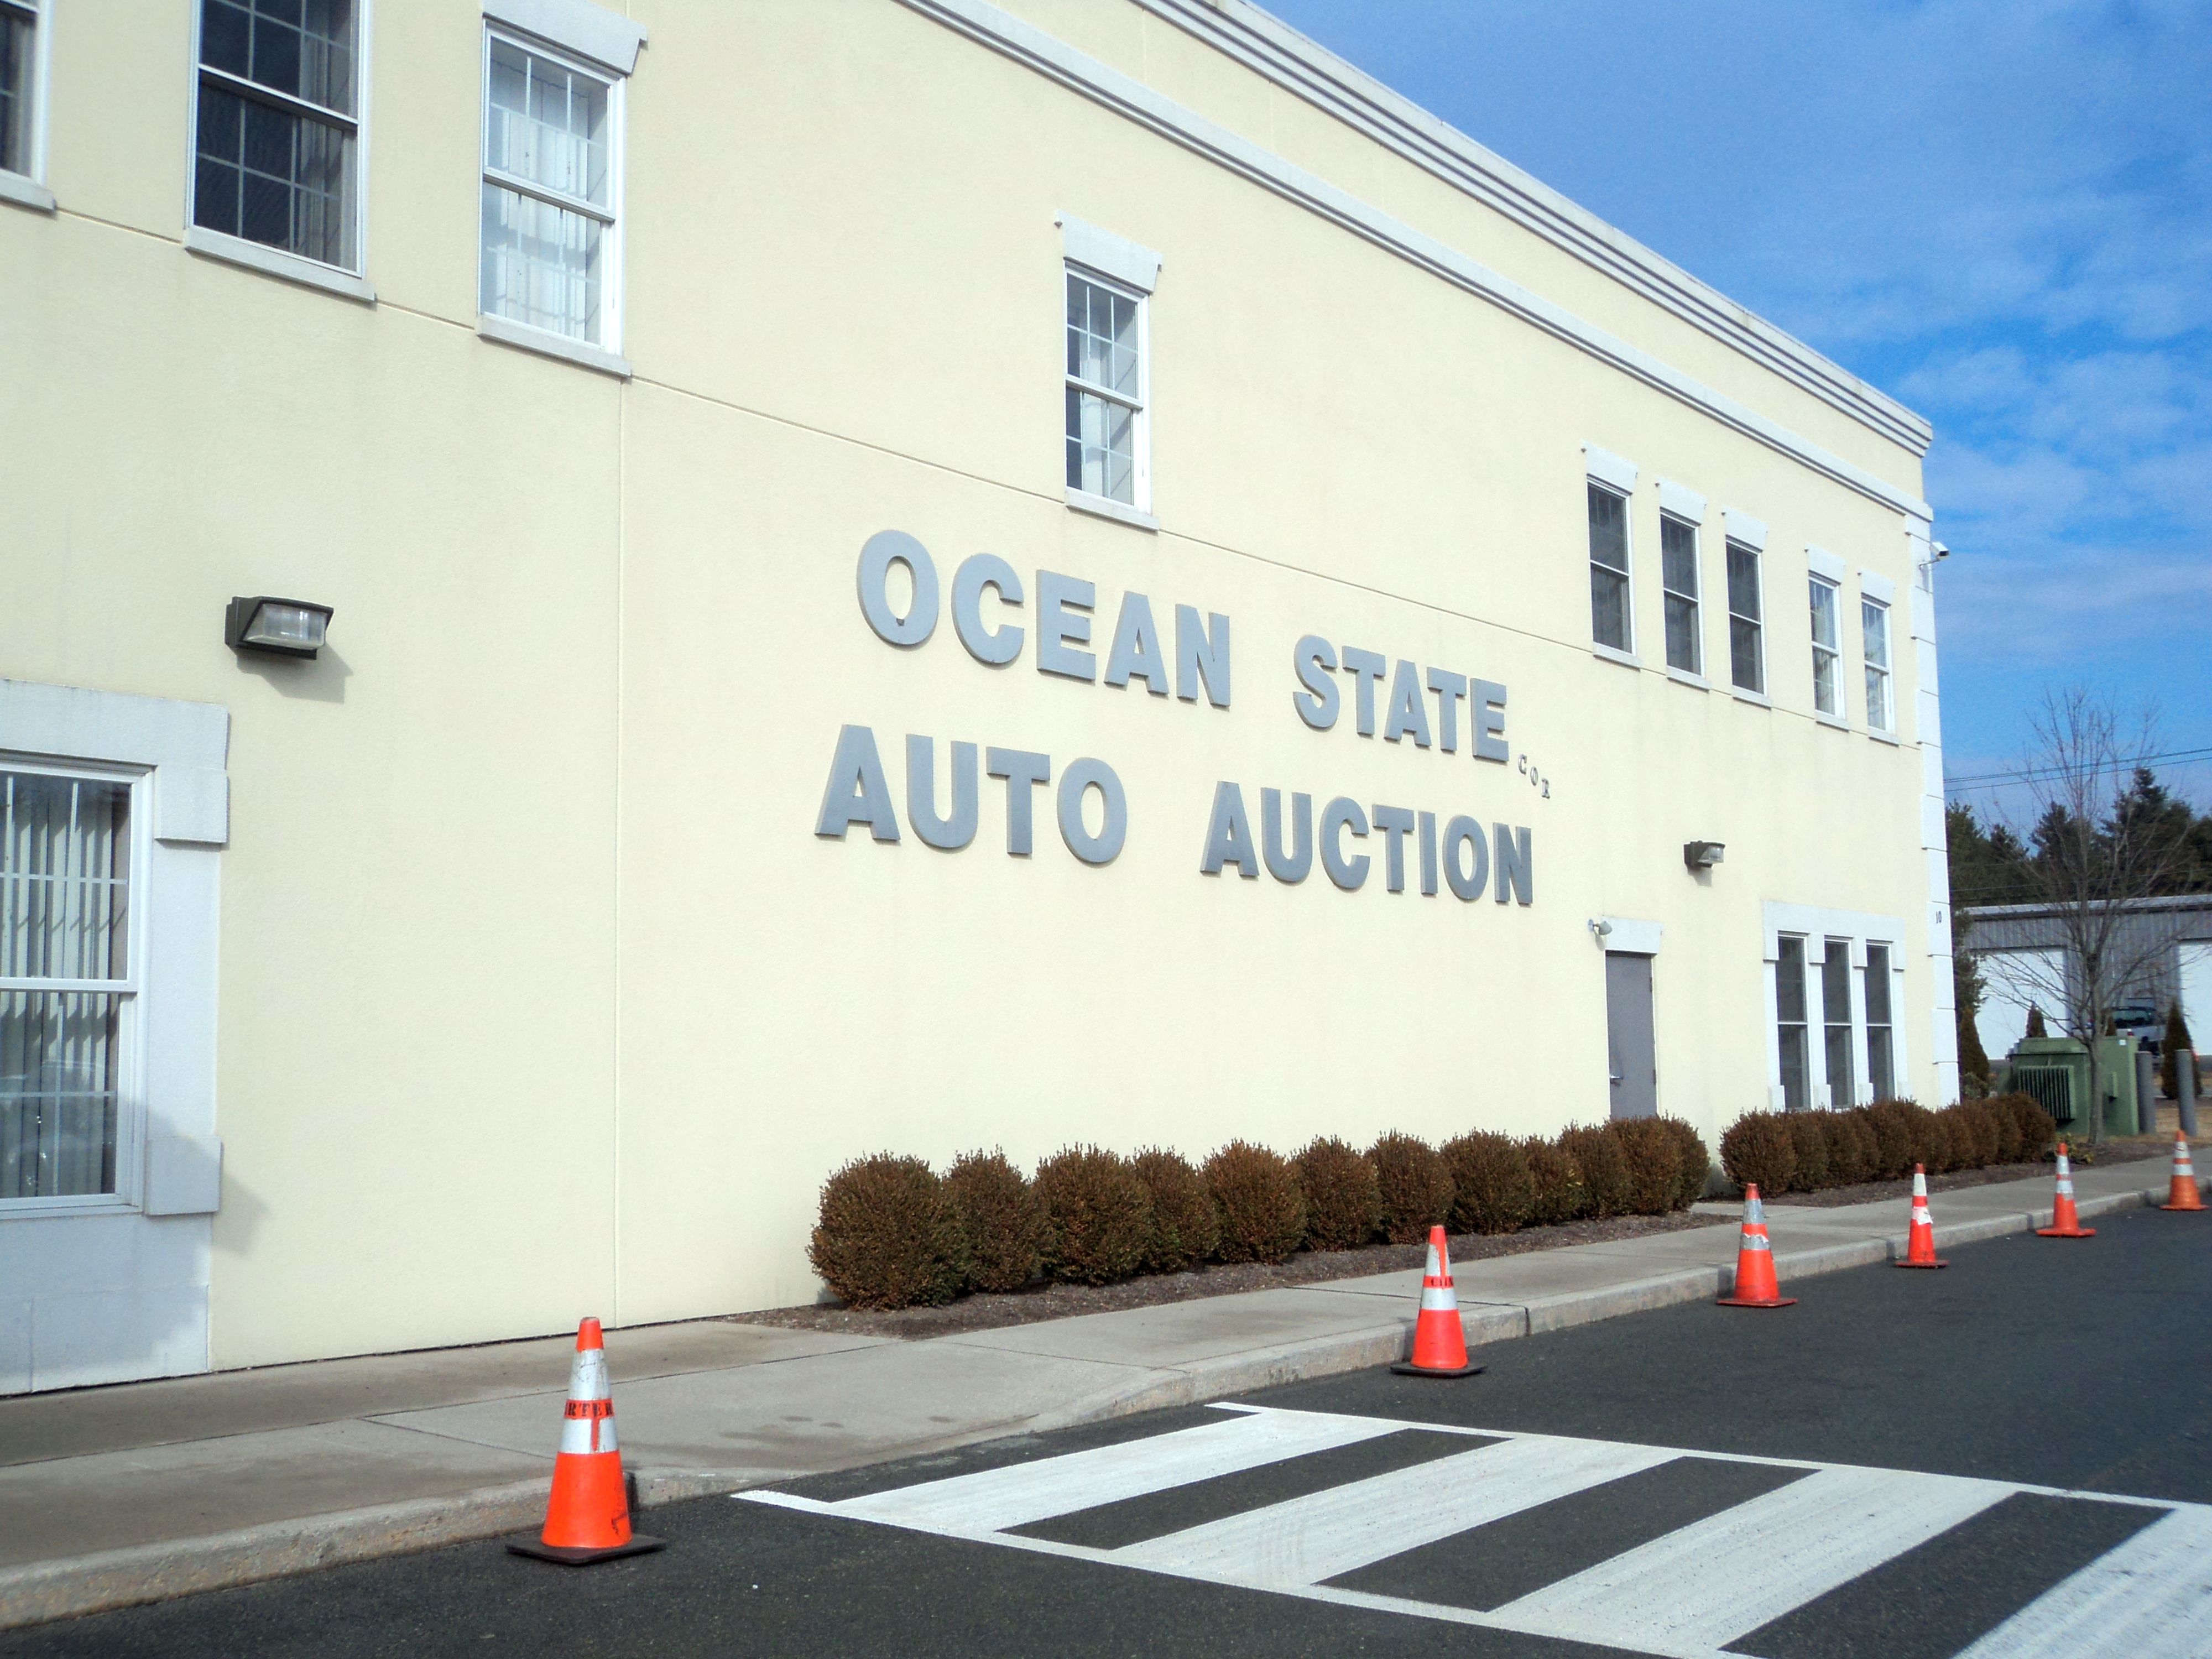 Where Does Your Donated Car Go? Learn About Auto Auctions